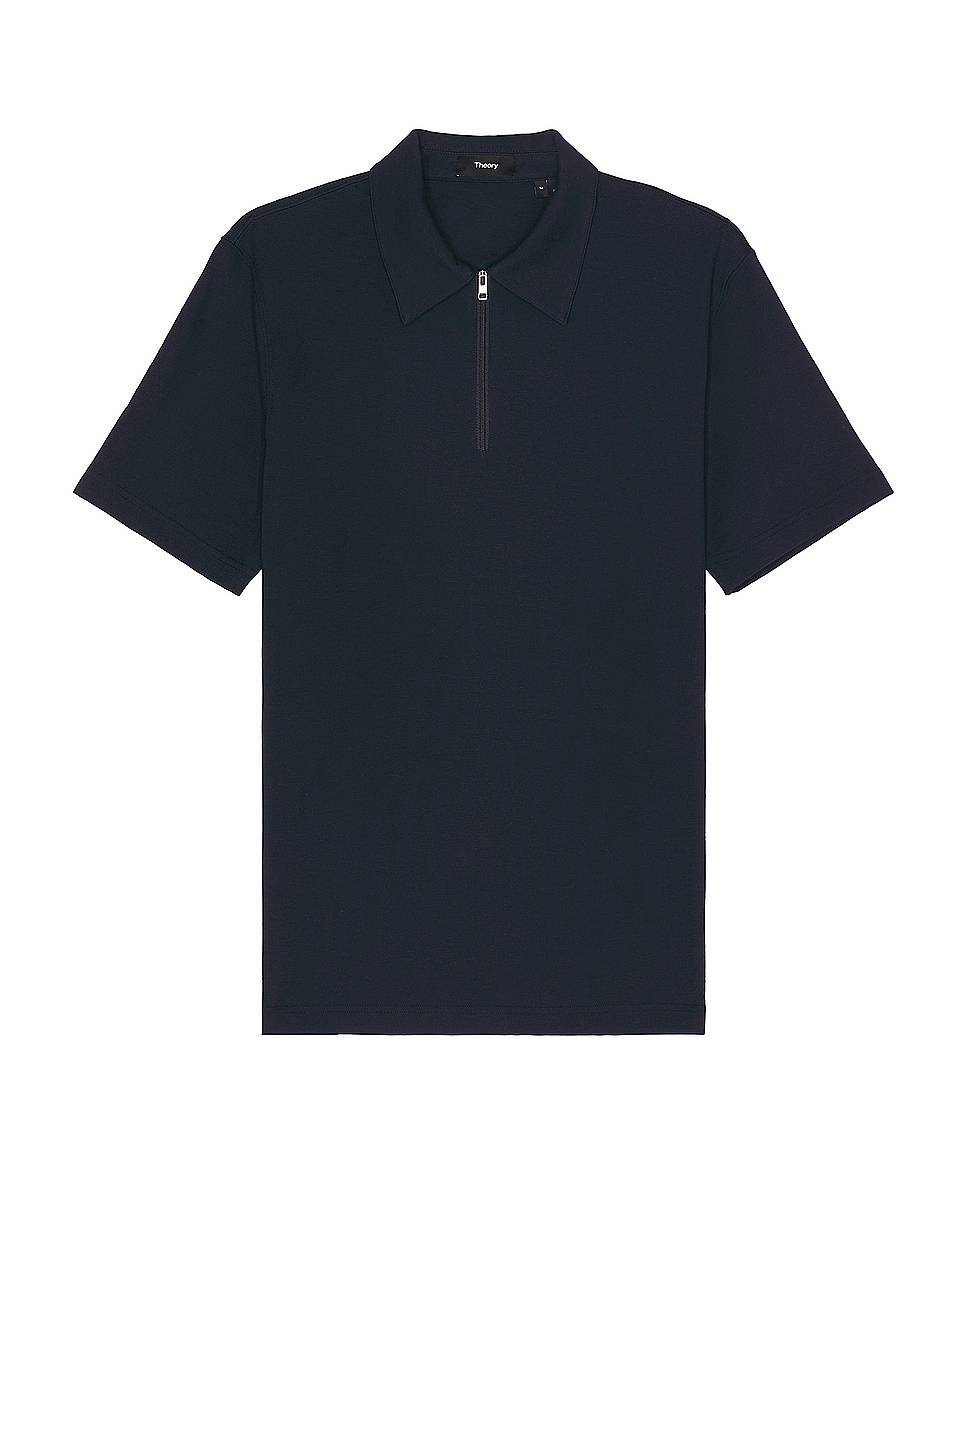 Image 1 of Theory Ryder Quarter Zip Polo in Baltic